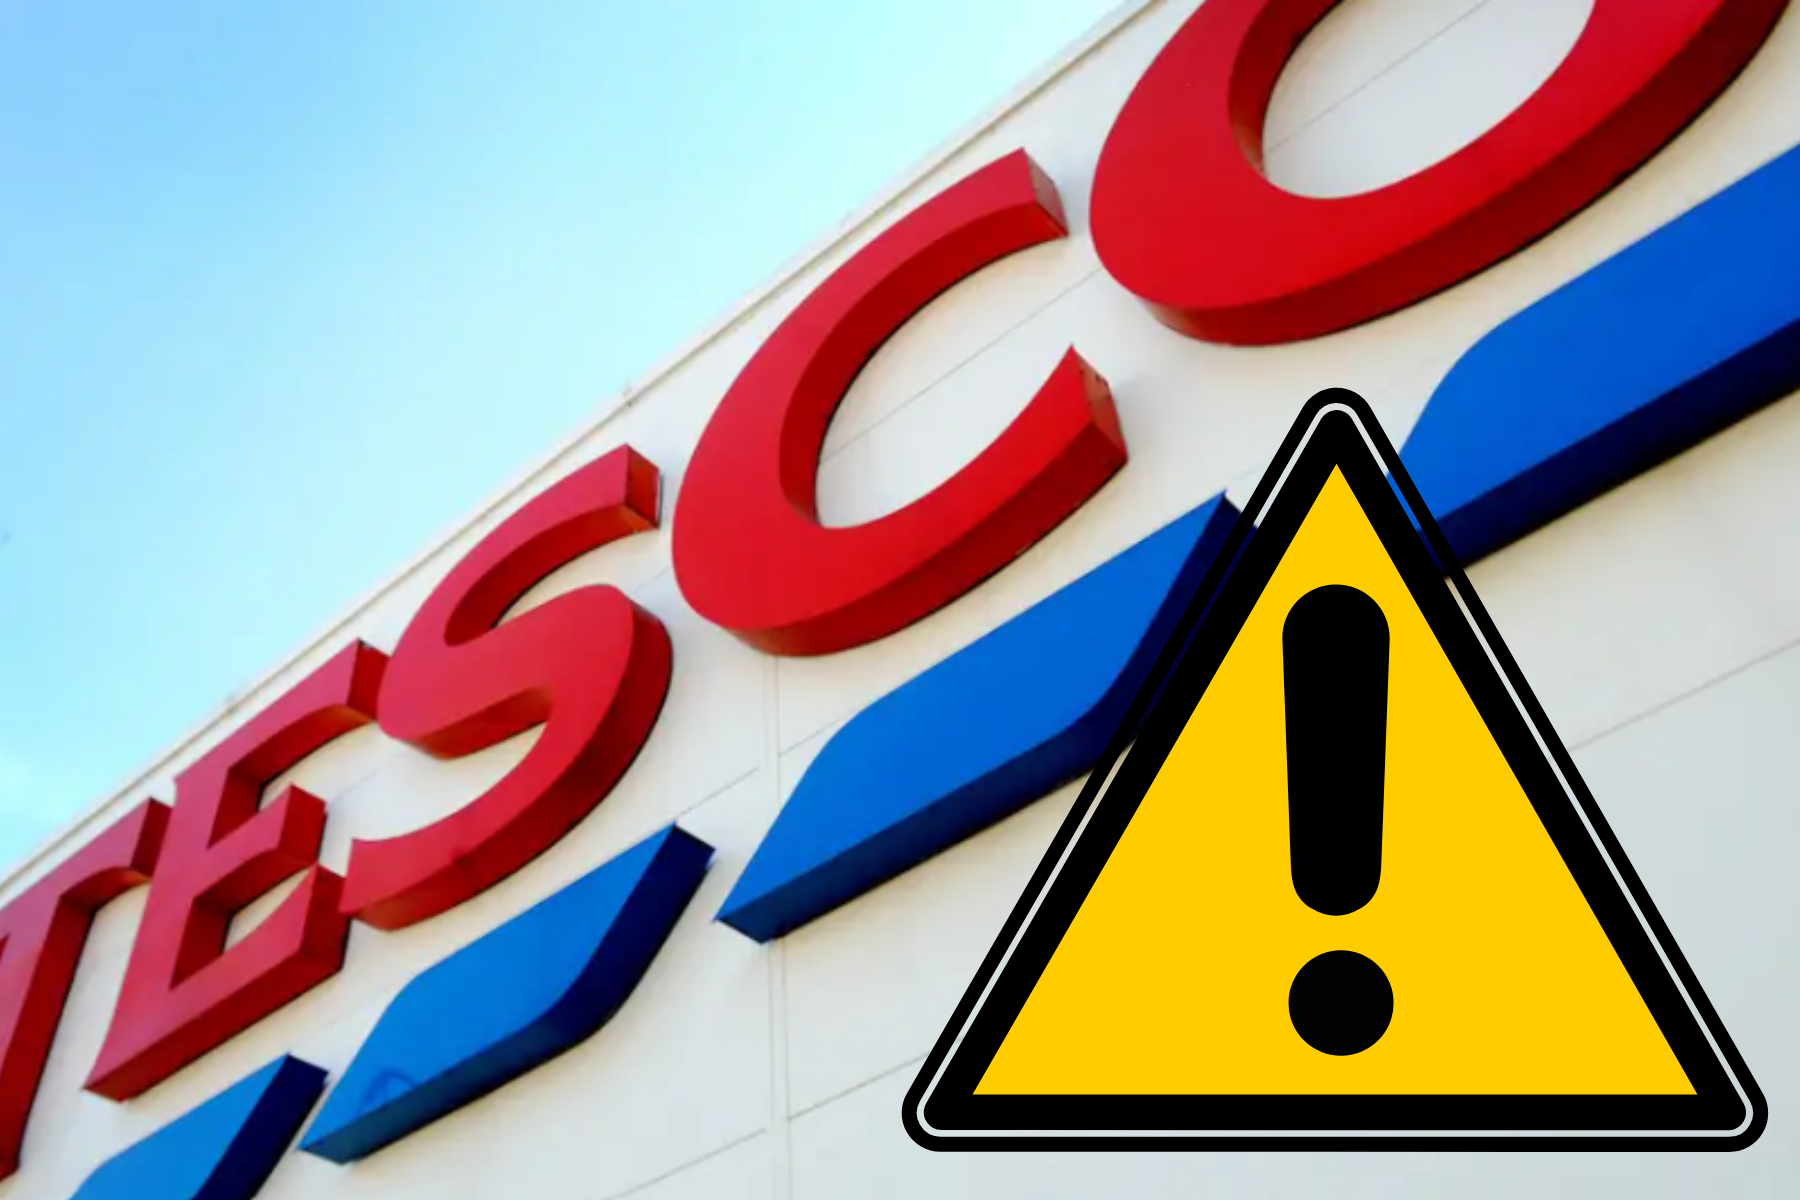 Tesco chicken recall: Huge Tesco recall amid salmonella fears - full list of products